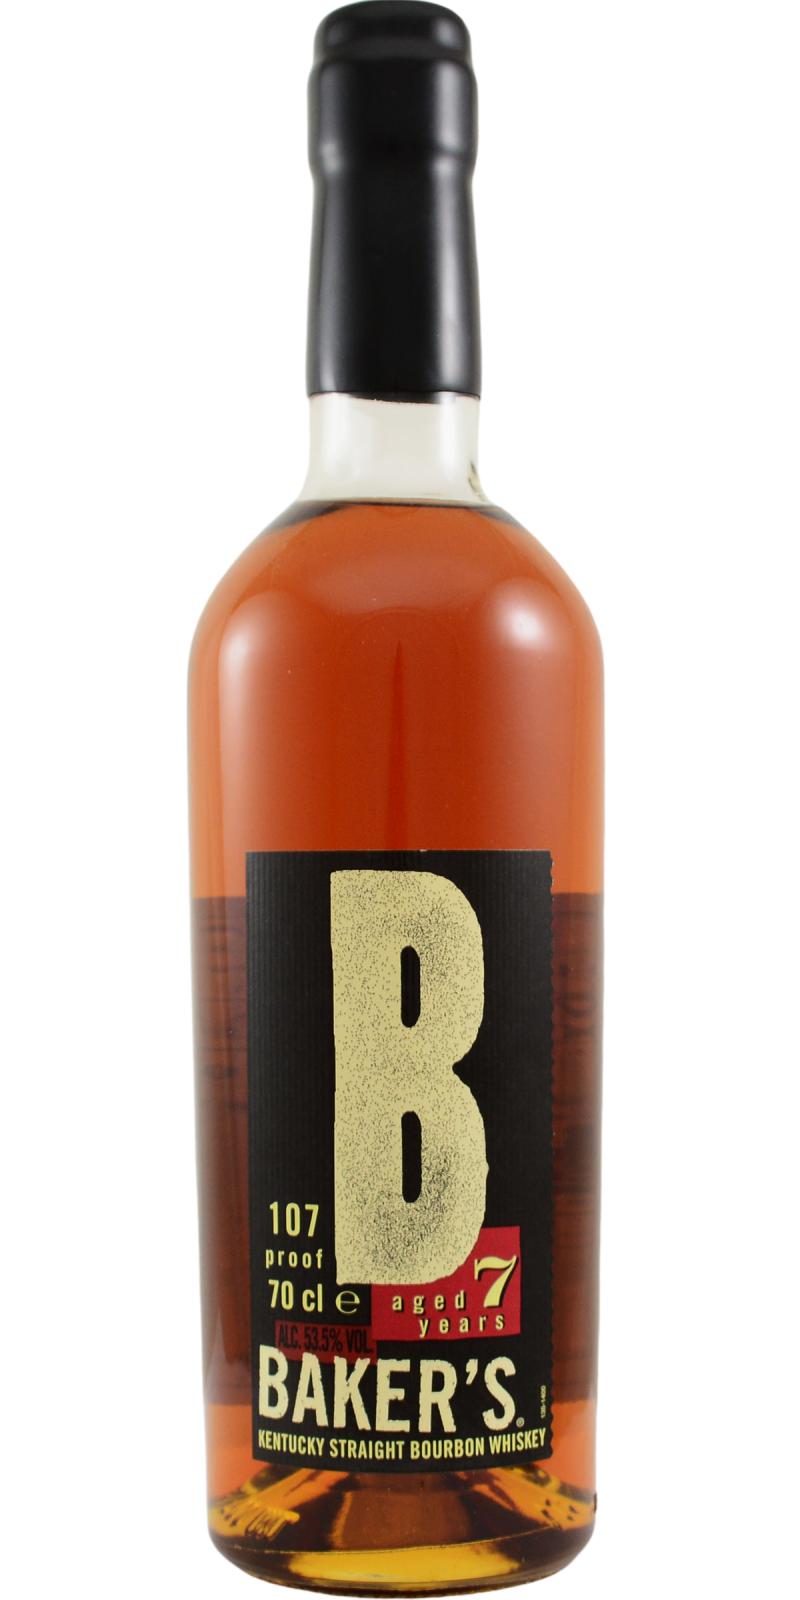 Baker's (USA) 07-year-old